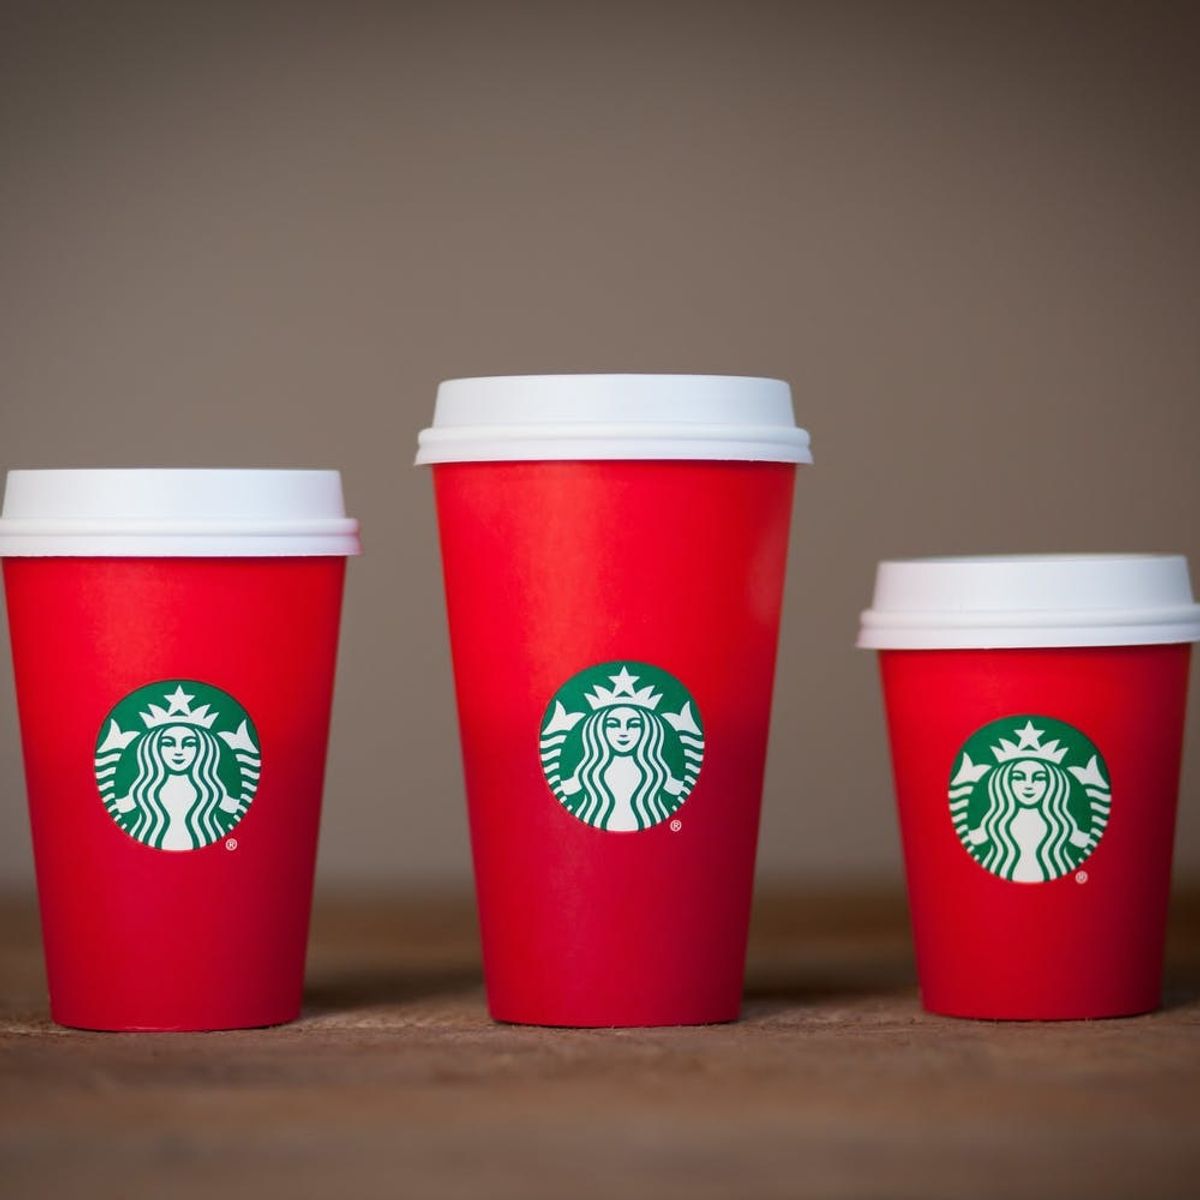 Dunkin’ Donuts Just Jumped into the Starbucks Red Cup Controversy